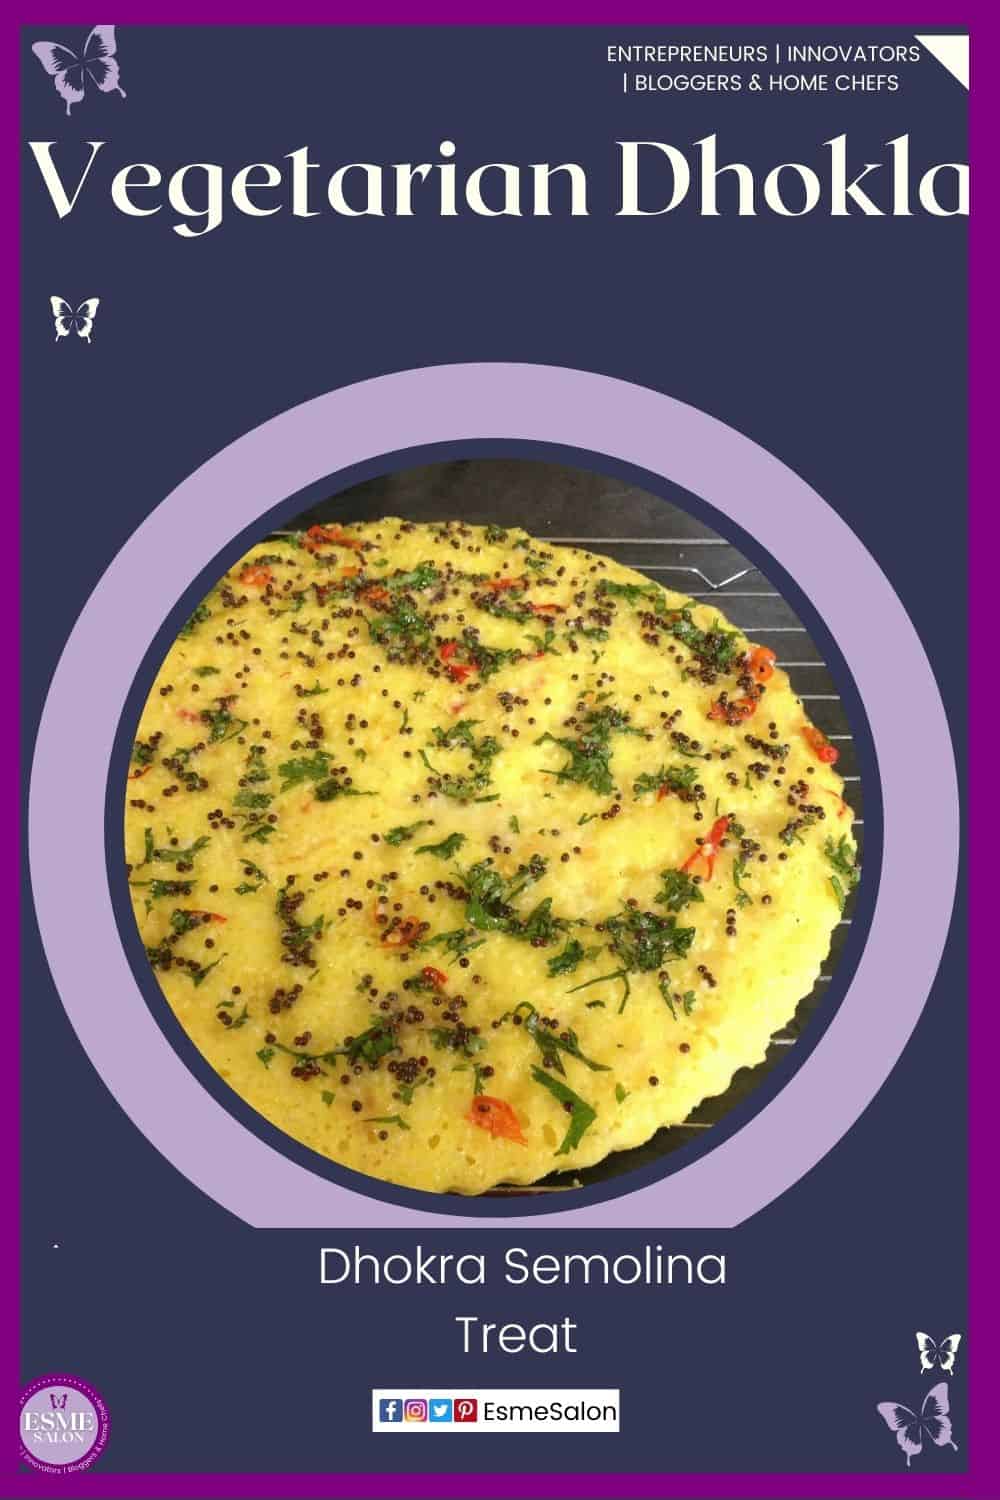 an image of an Indian semolina Dhokla/Dhokra delicacy